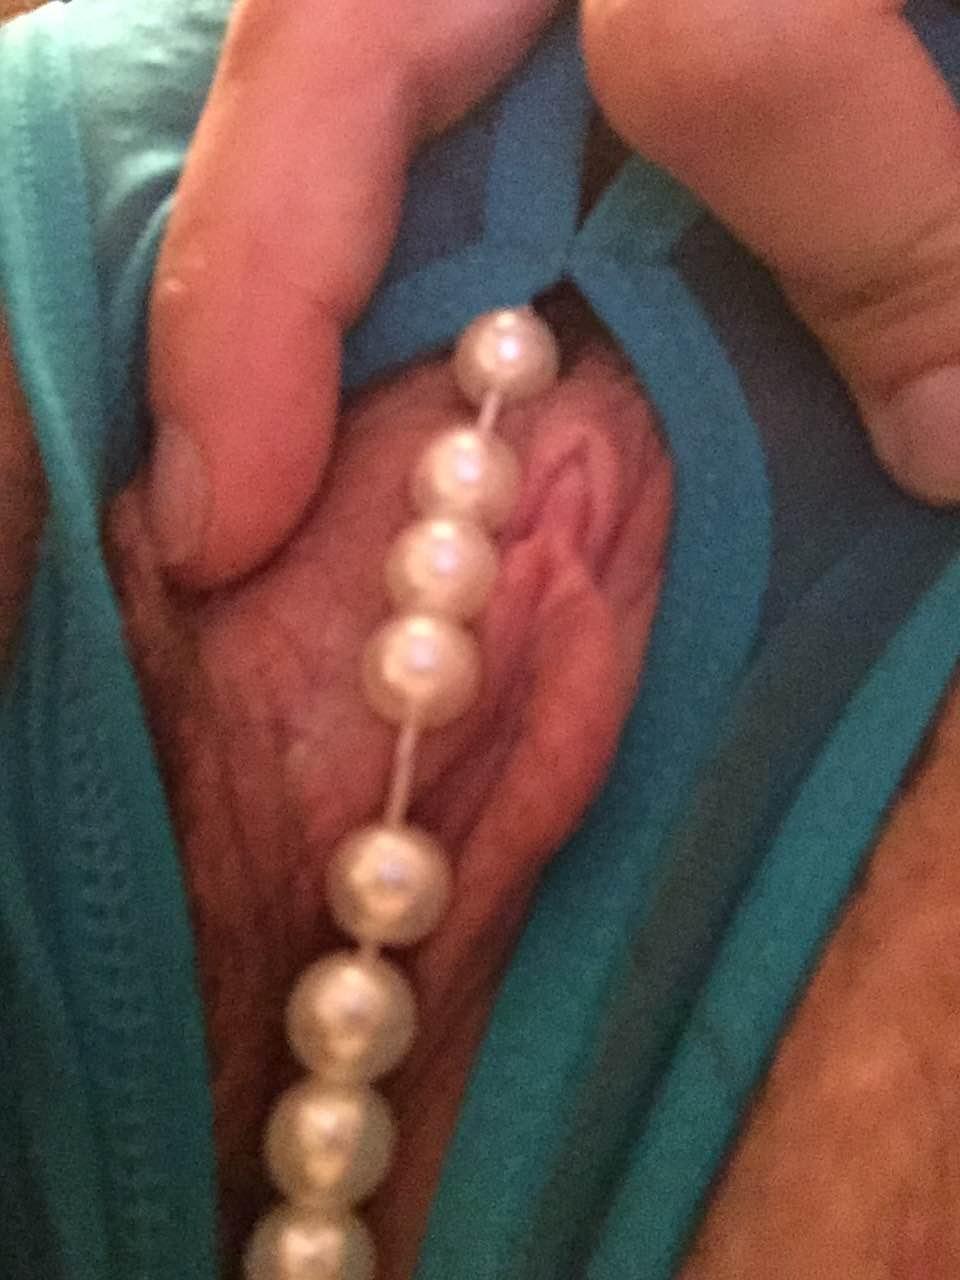 My wife's first pic. She can't wait to see what you think.